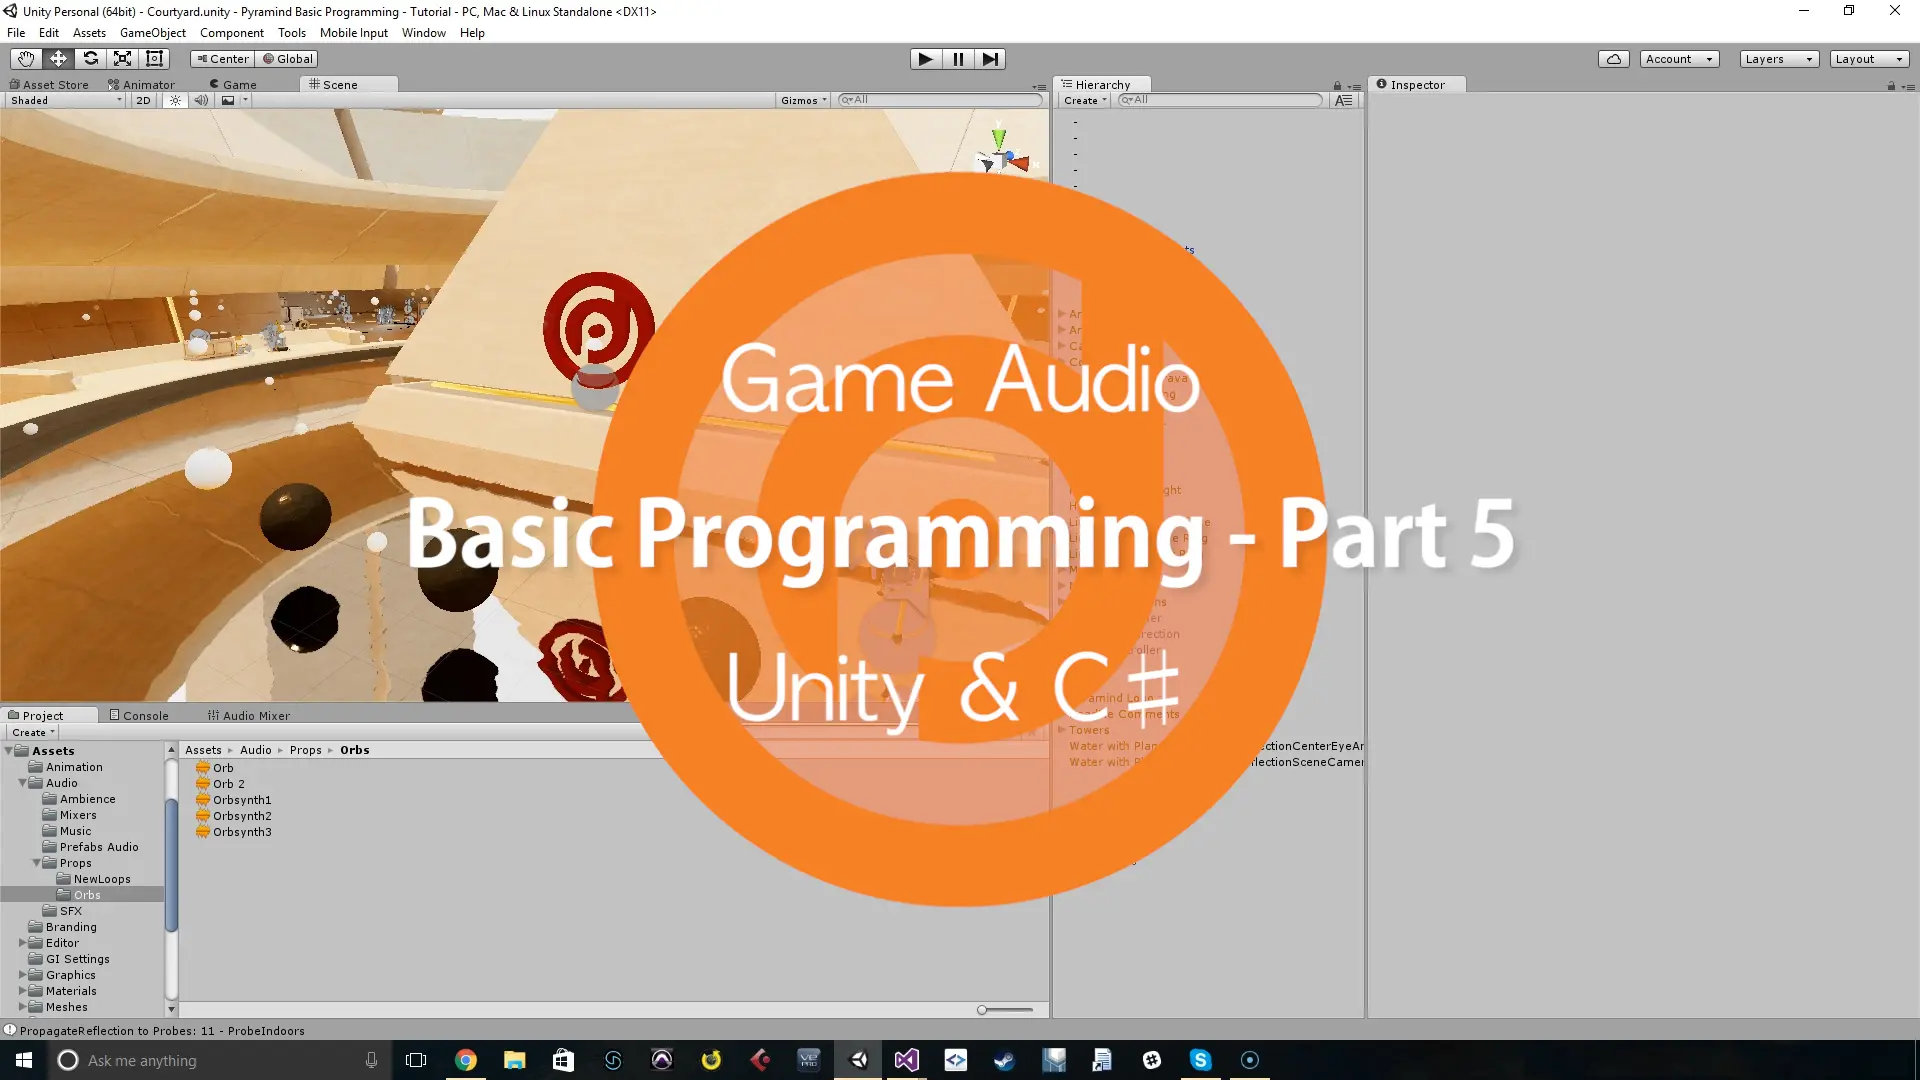 This is part 1 of a basic programming tutorial for game audio in Unity using C#5.